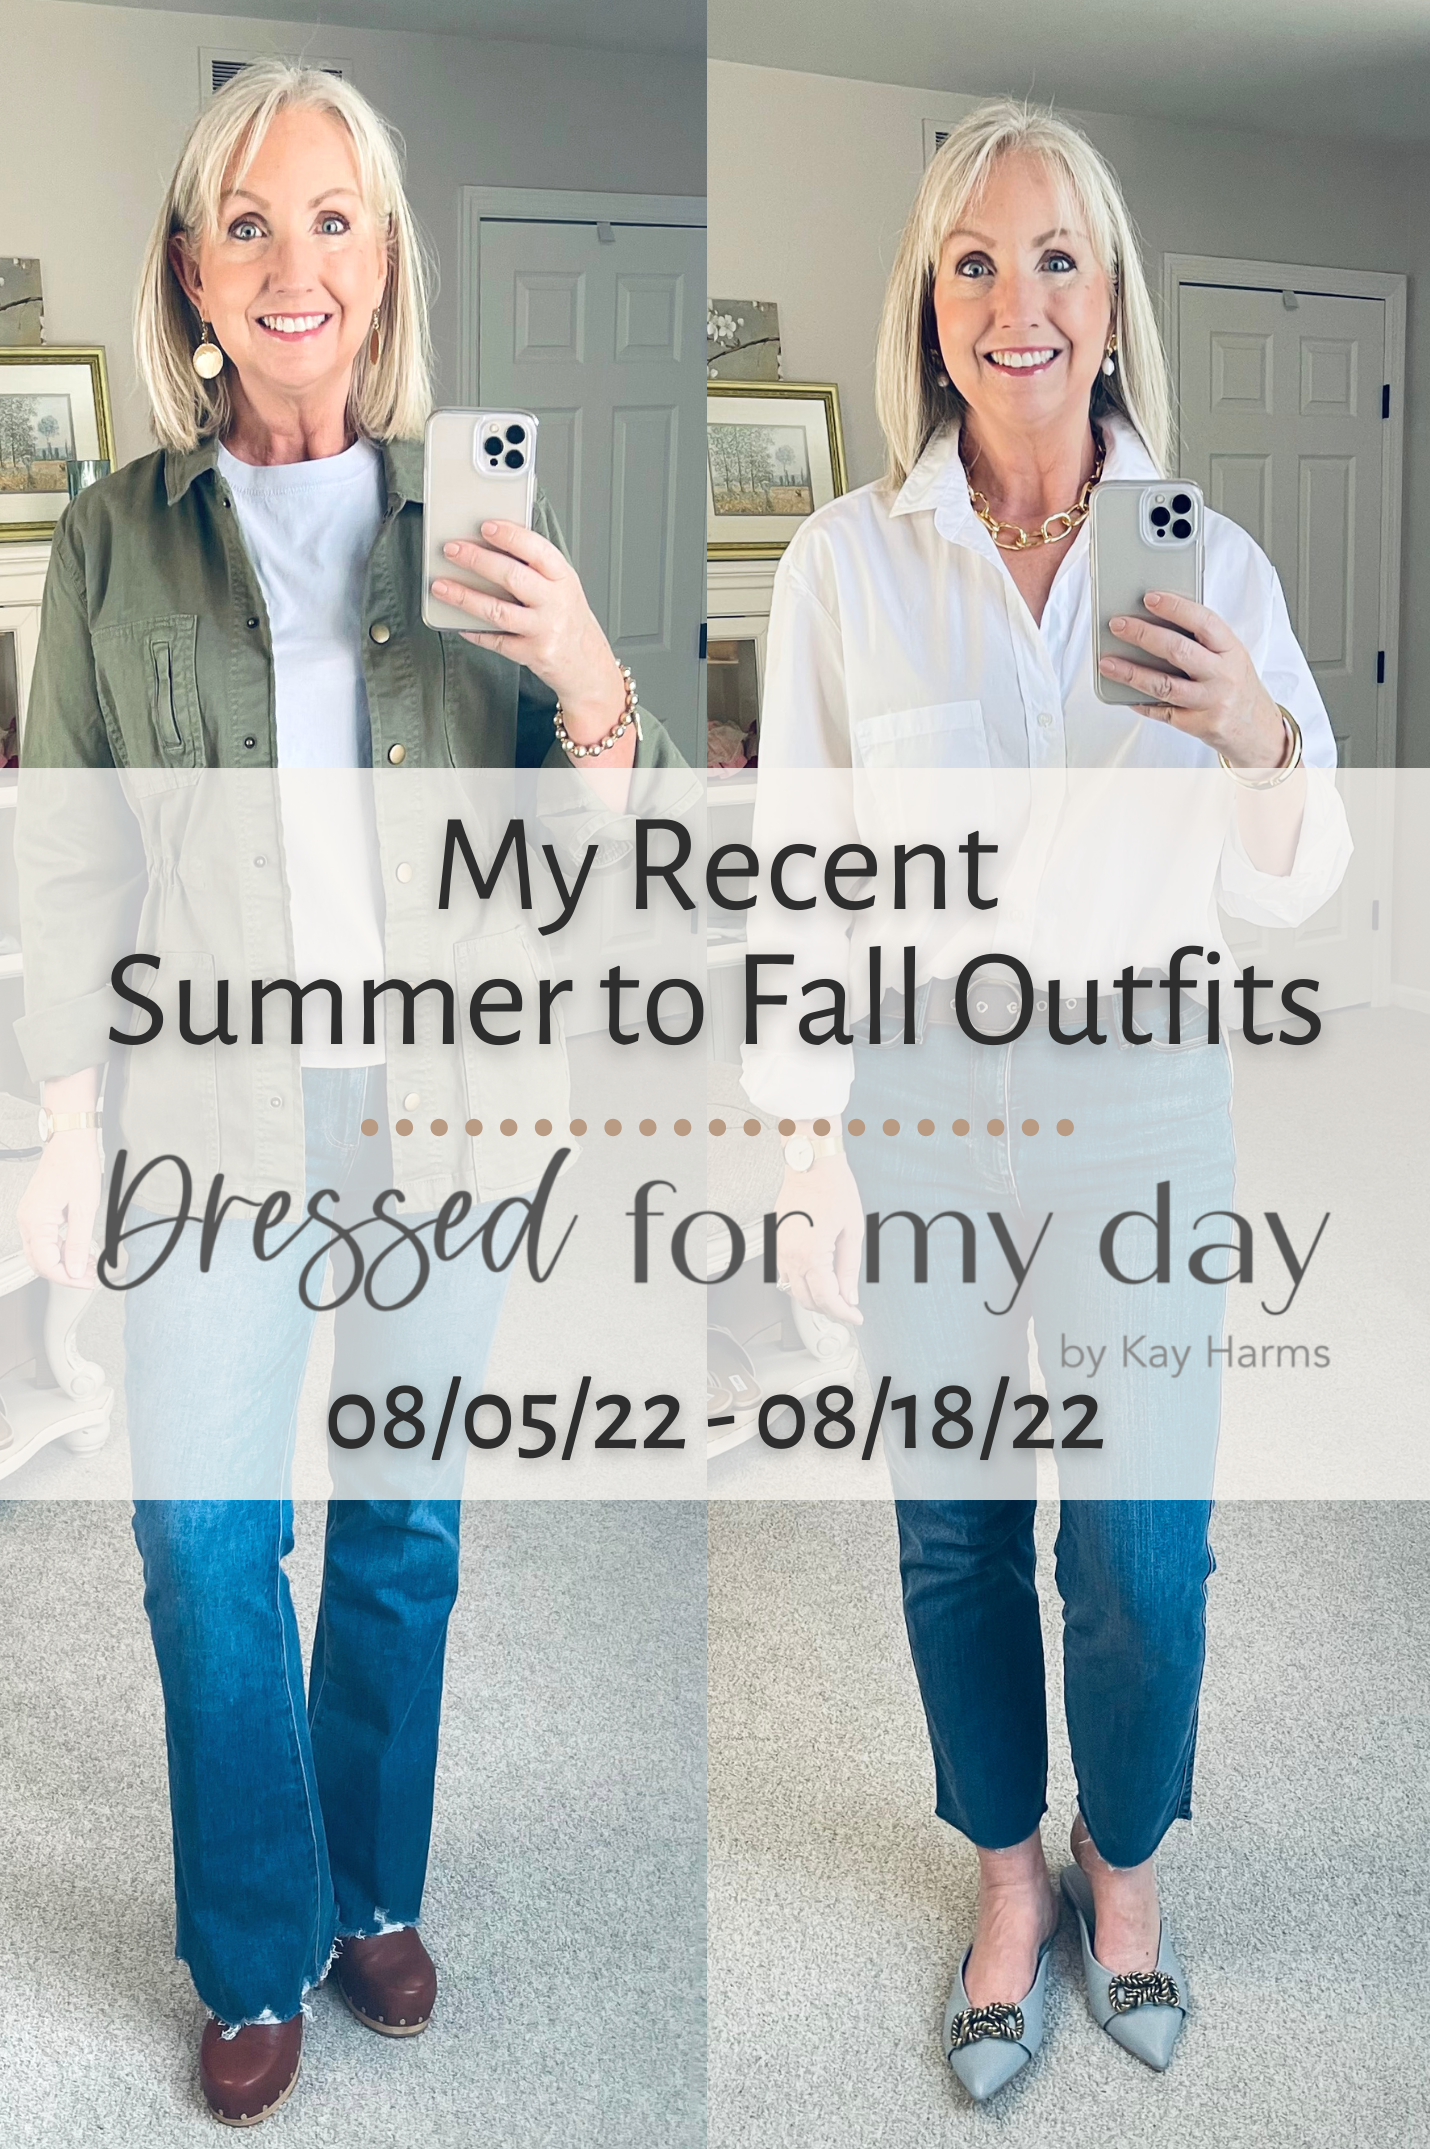 My Recent Summer to Fall Outfits